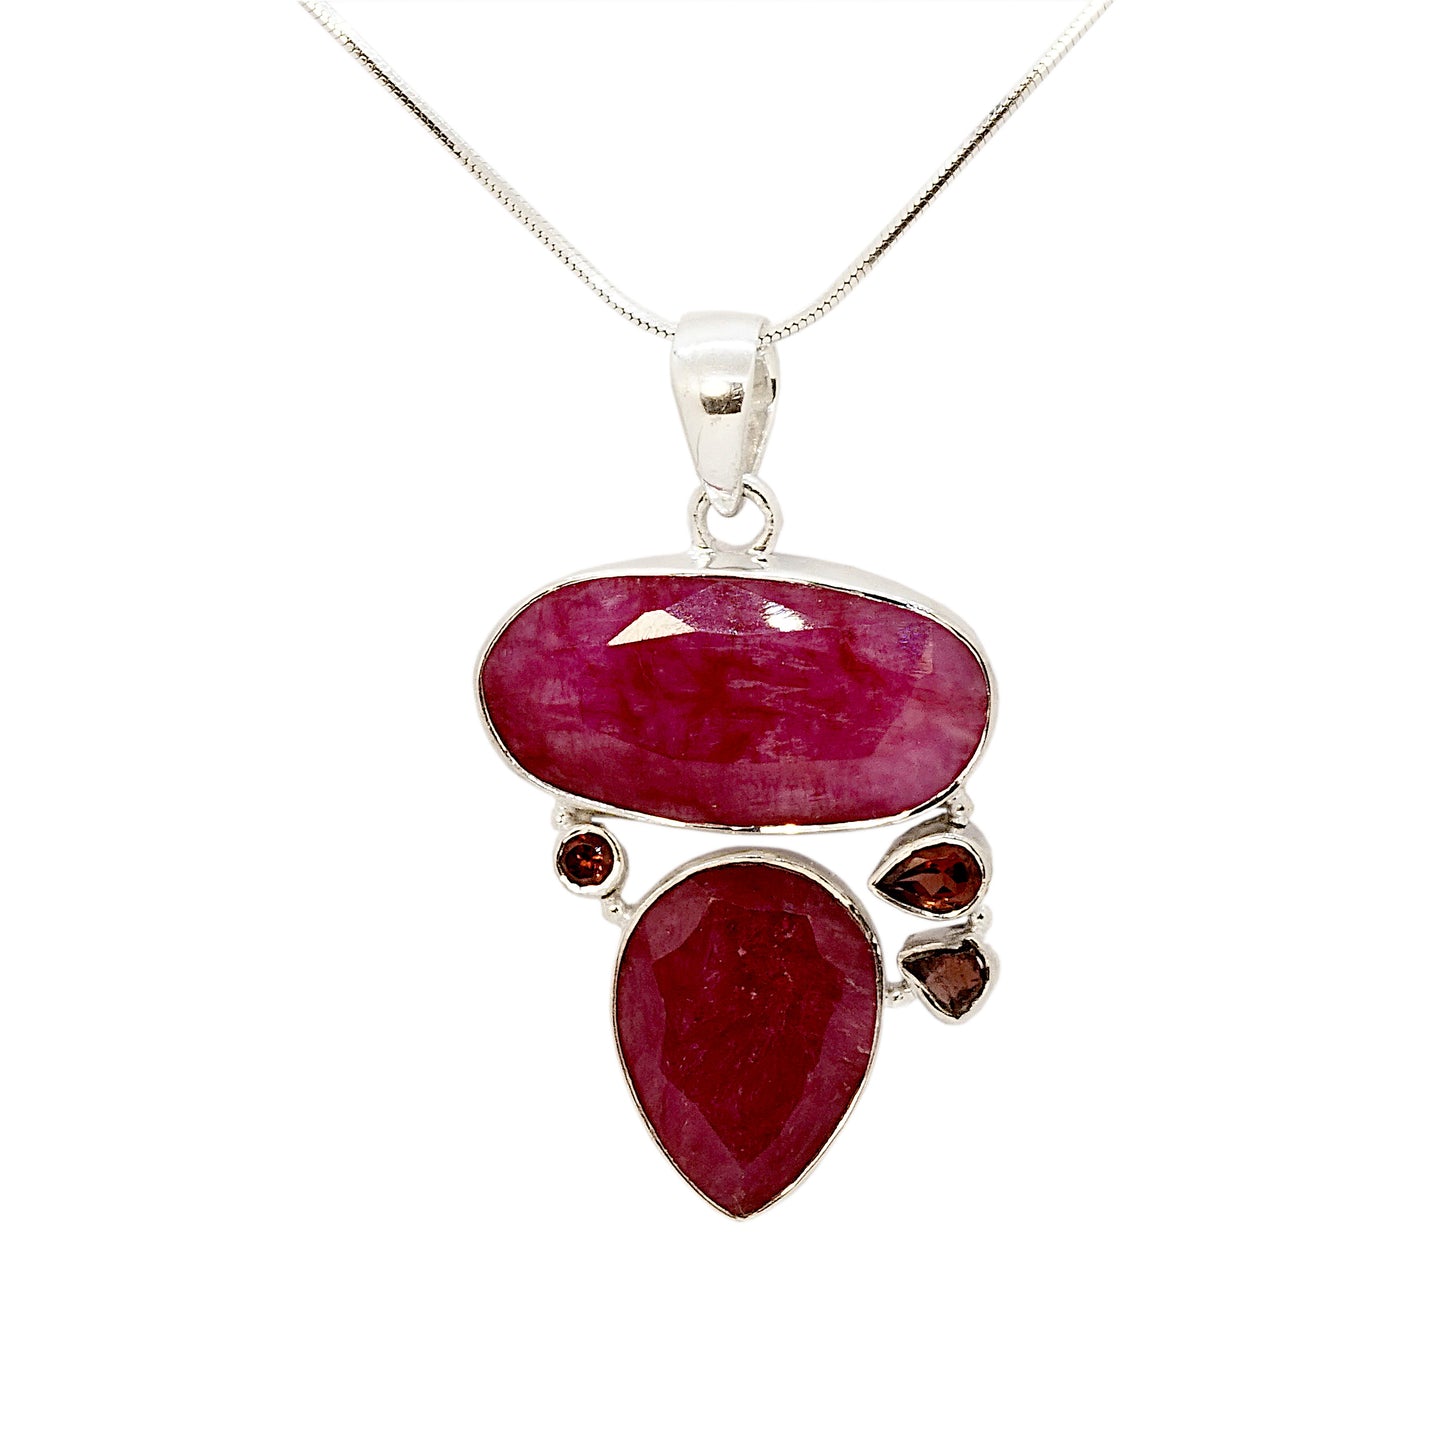 Ruby and Garnet Sterling Silver Pendant and Chain